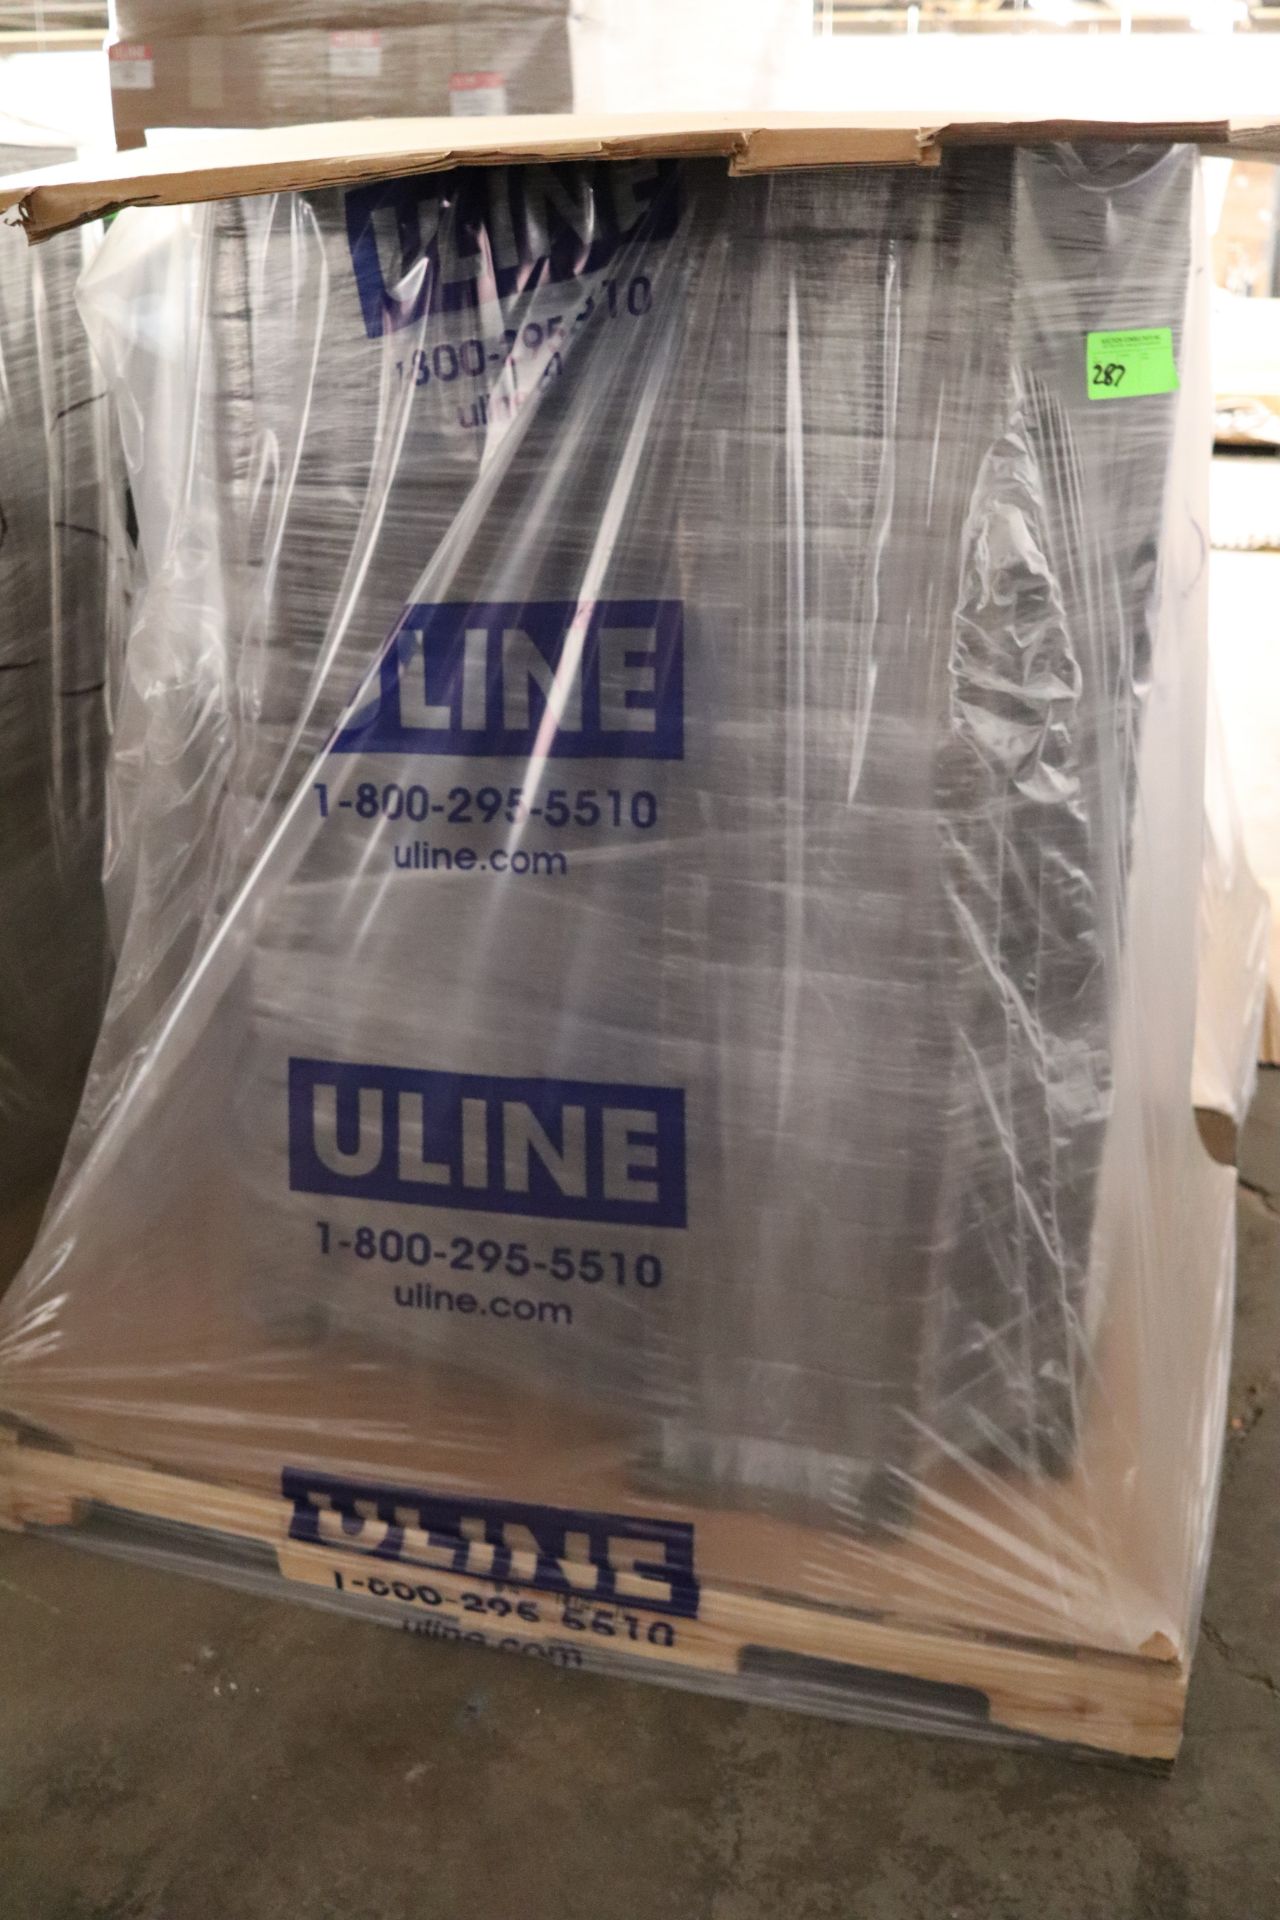 Pallet of Uline S-13216G forest green boxes